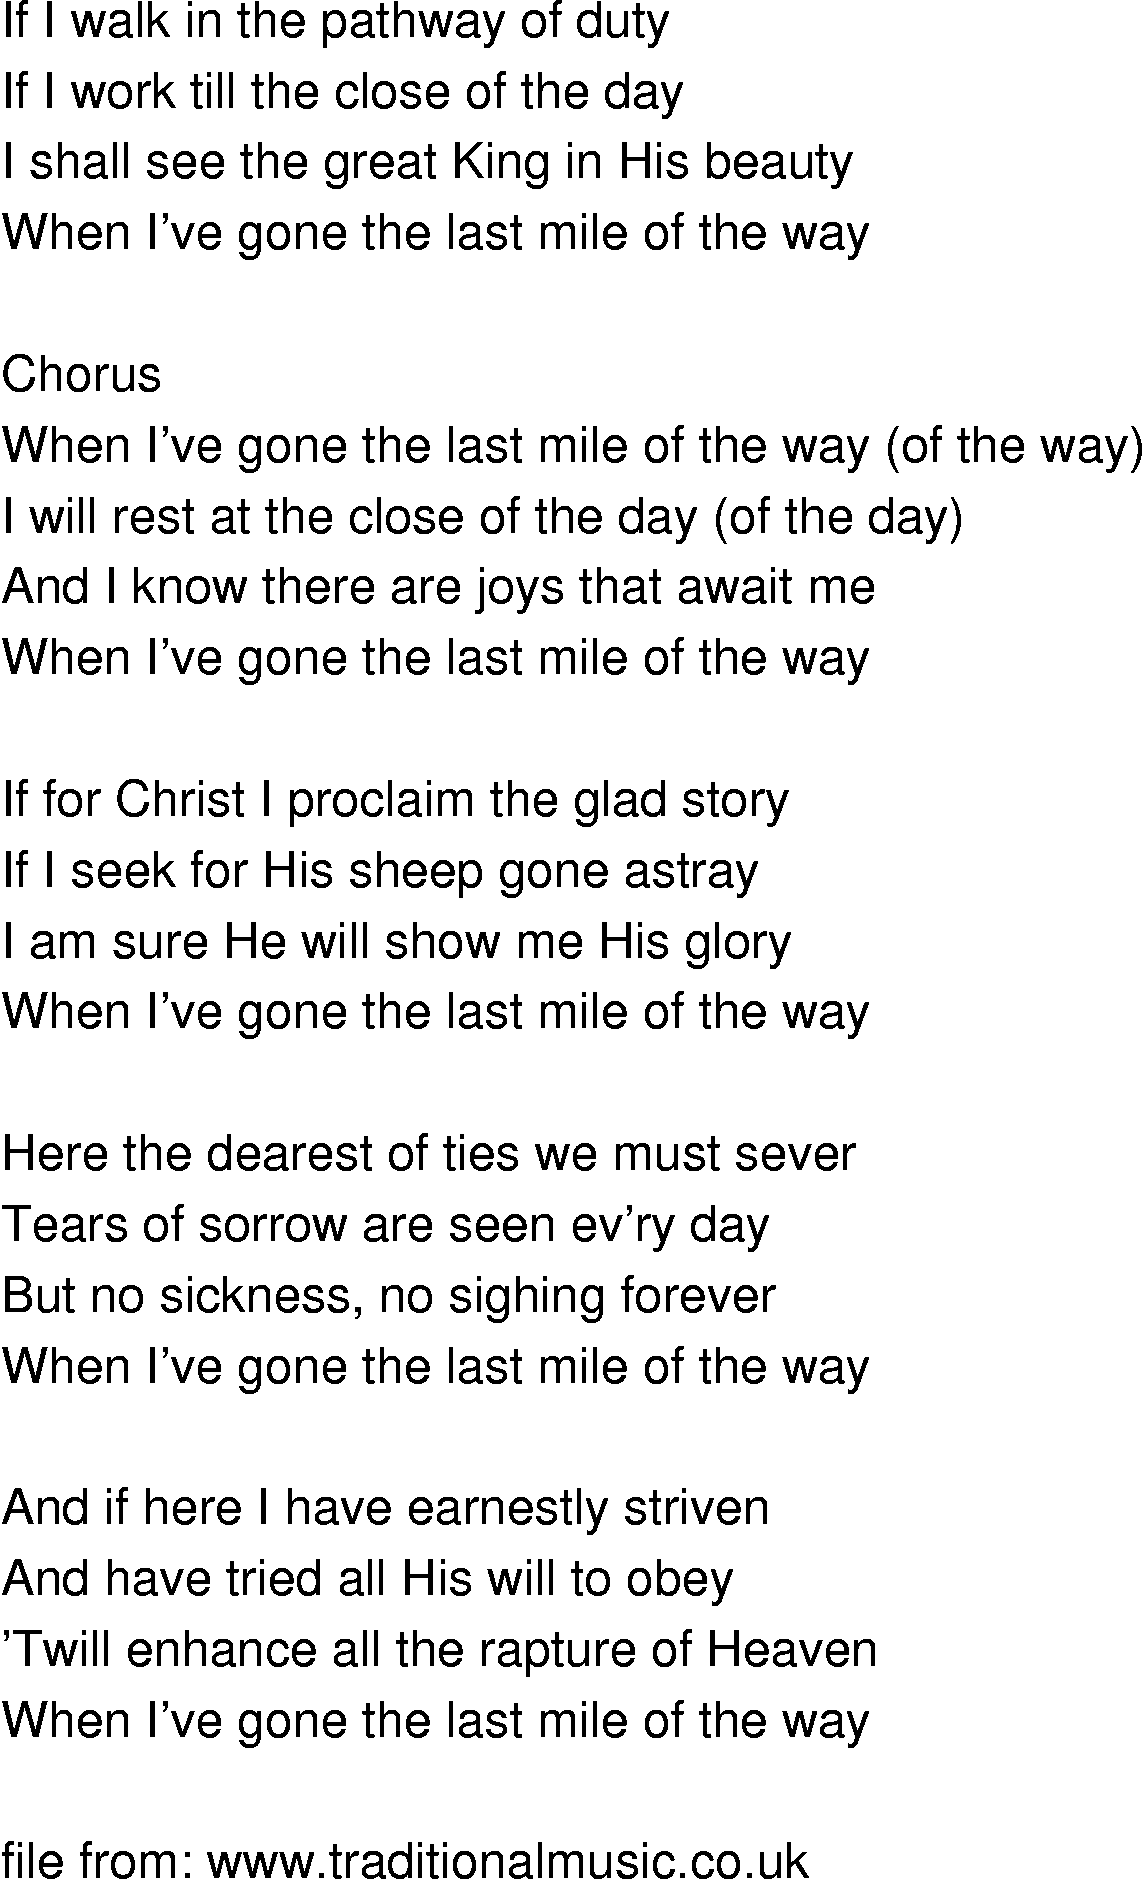 Old-Time (oldtimey) Song Lyrics - last mile of the way